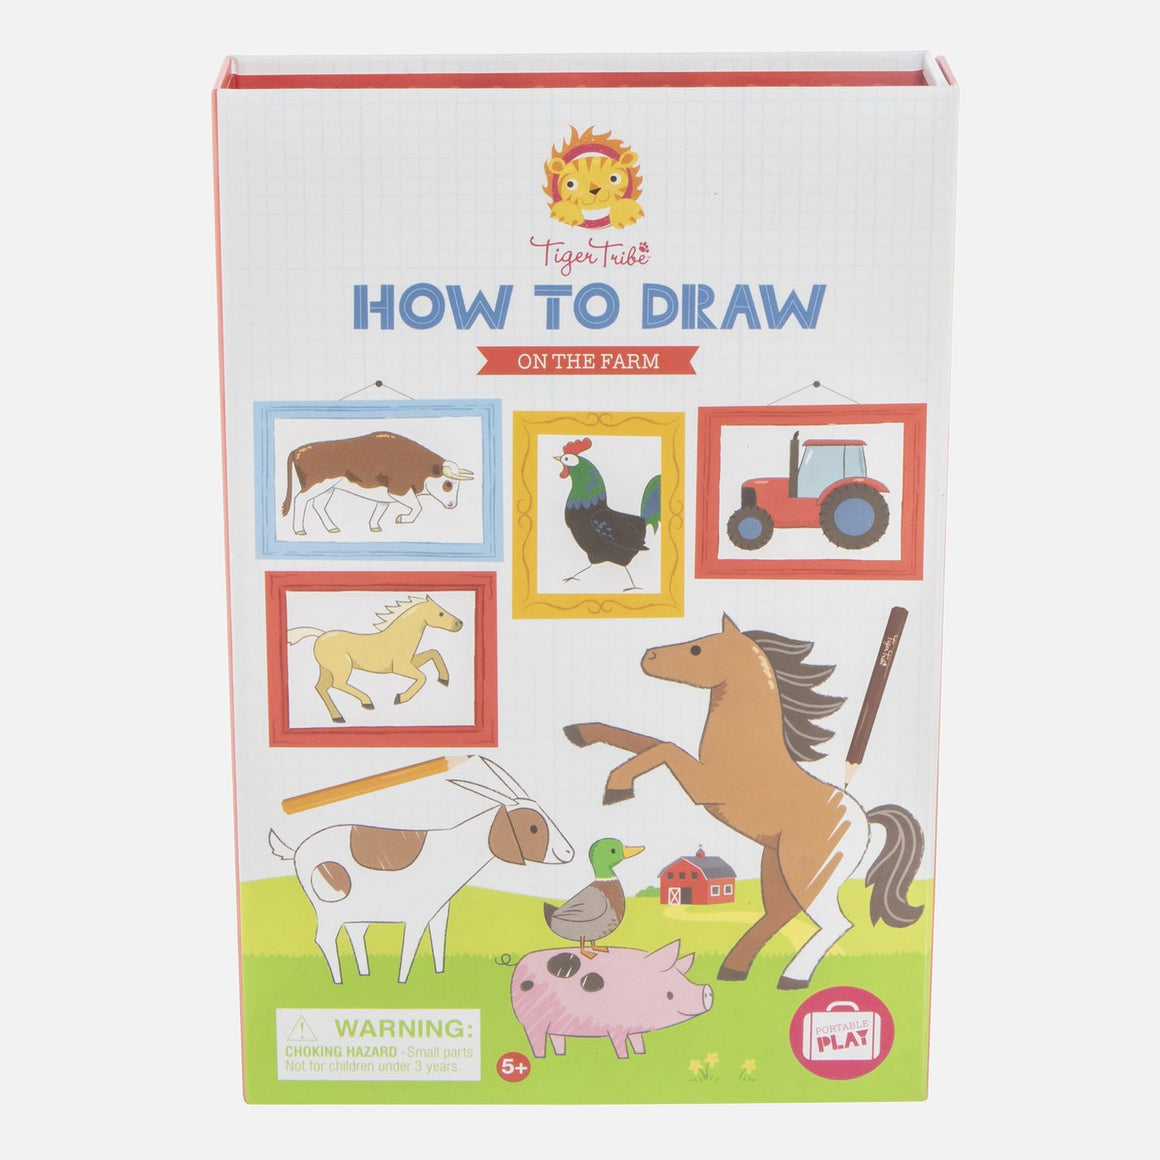 How to draw on the farm